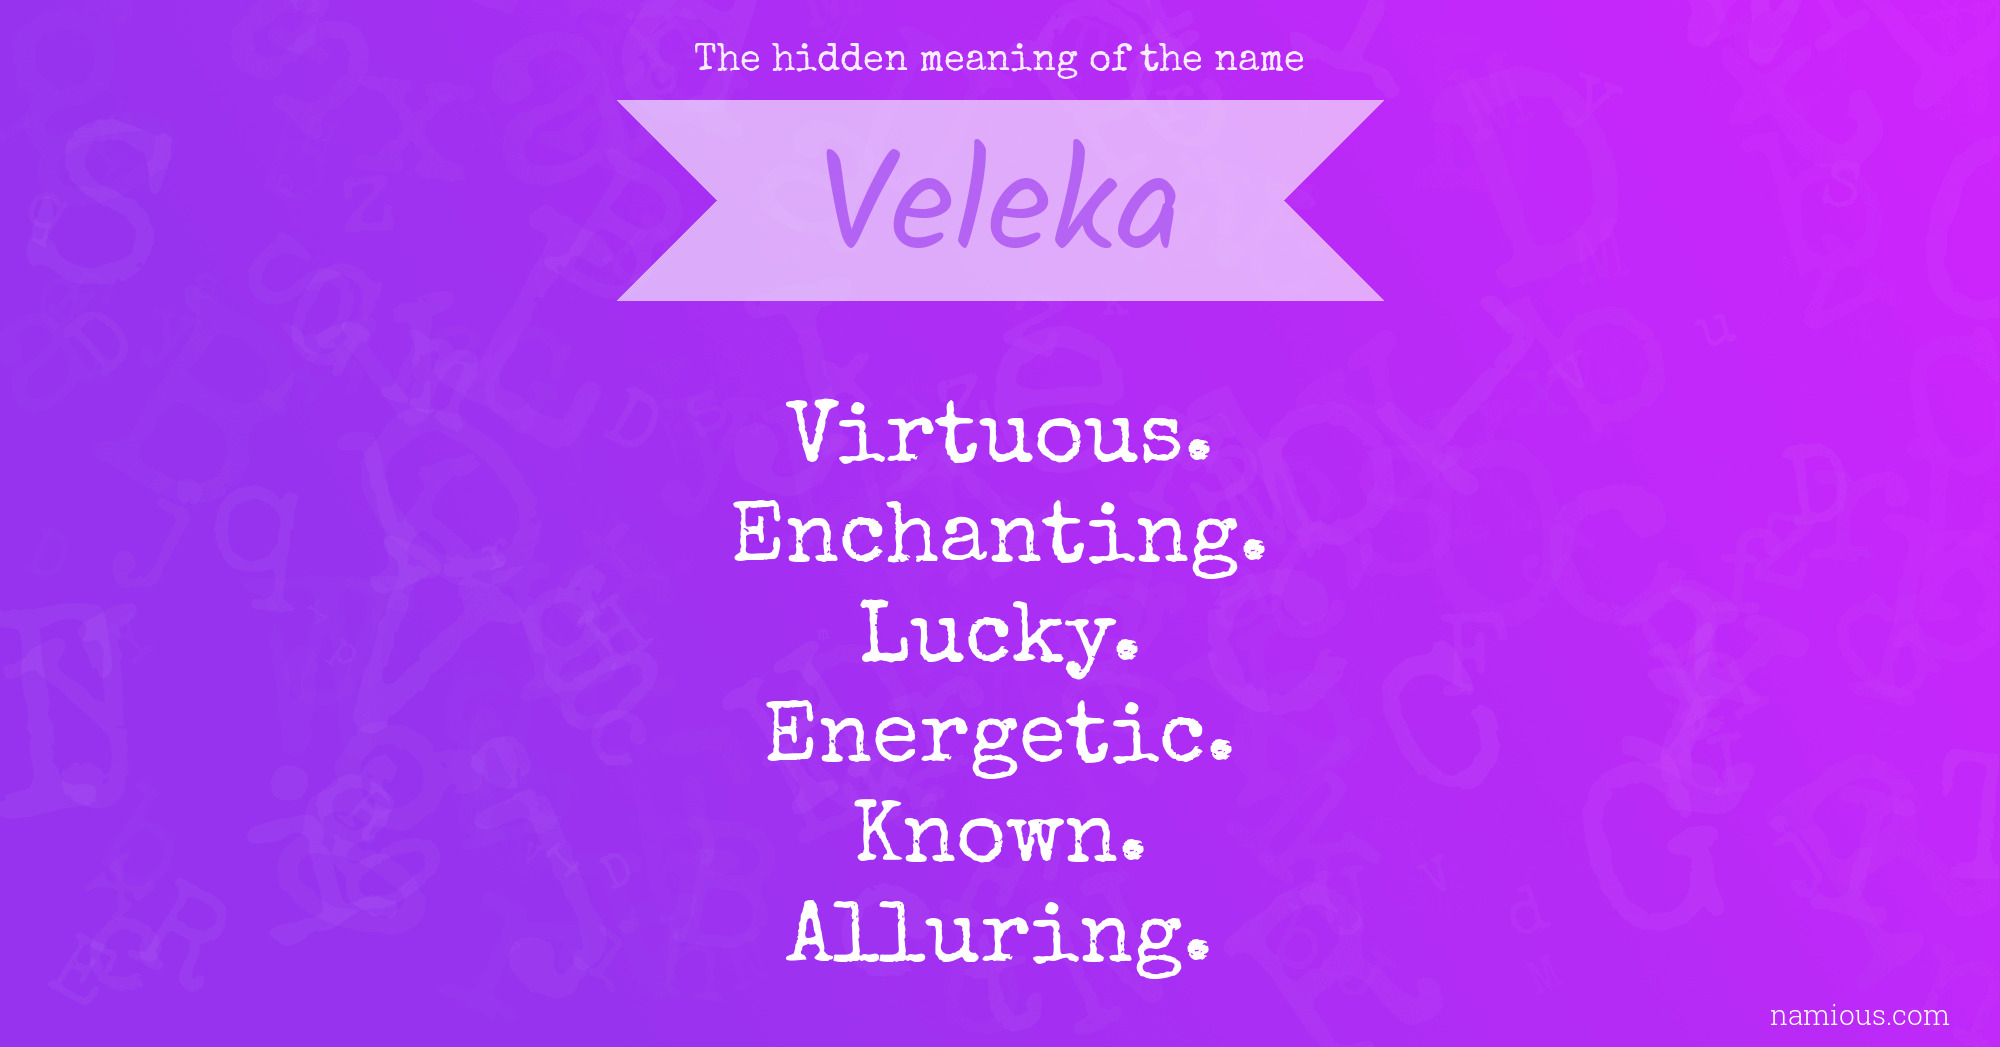 The hidden meaning of the name Veleka